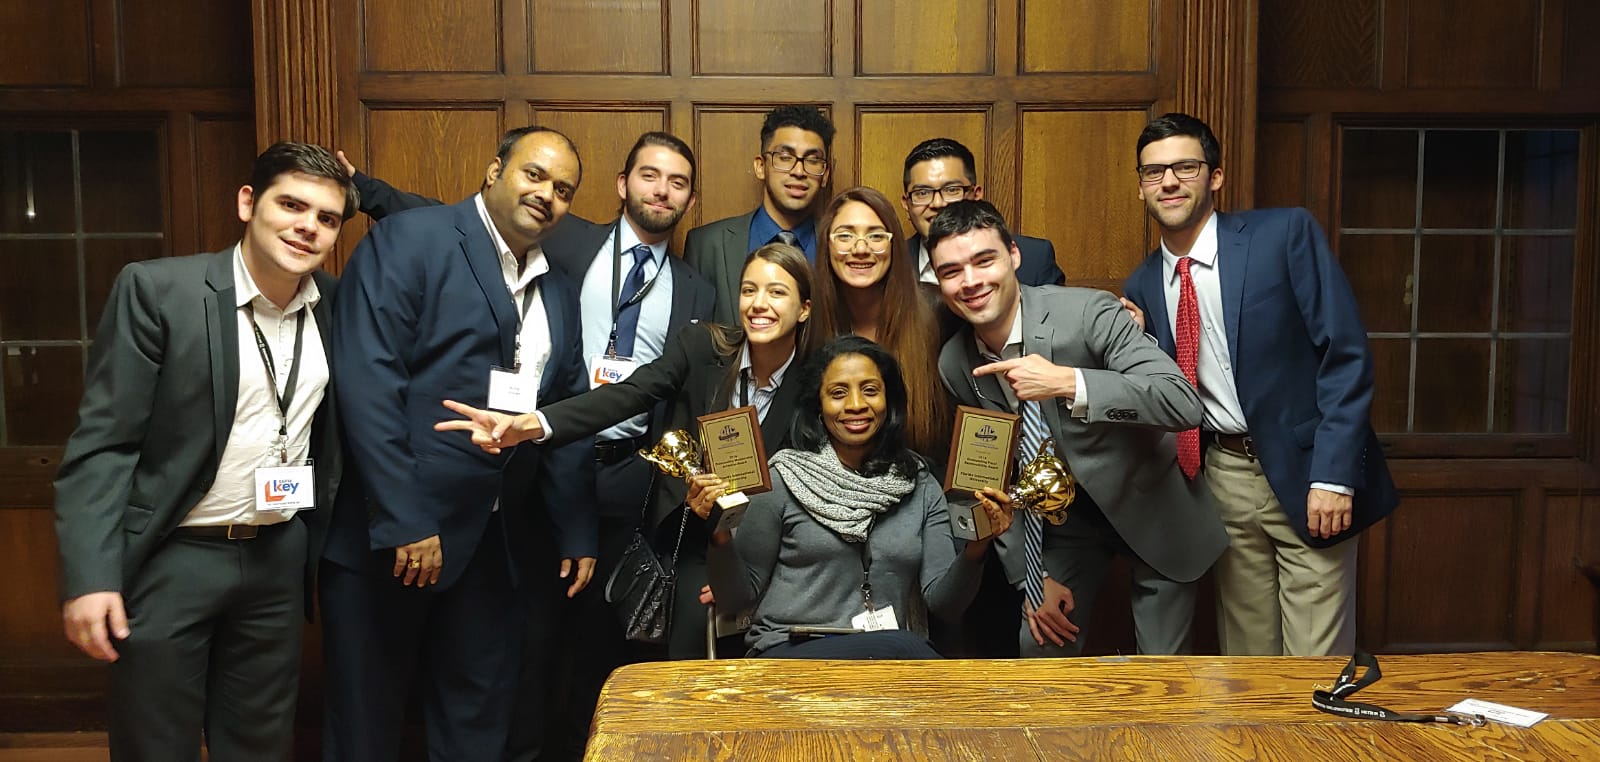 FIU students capture top awards in business analytics and blockchain at national technology conference